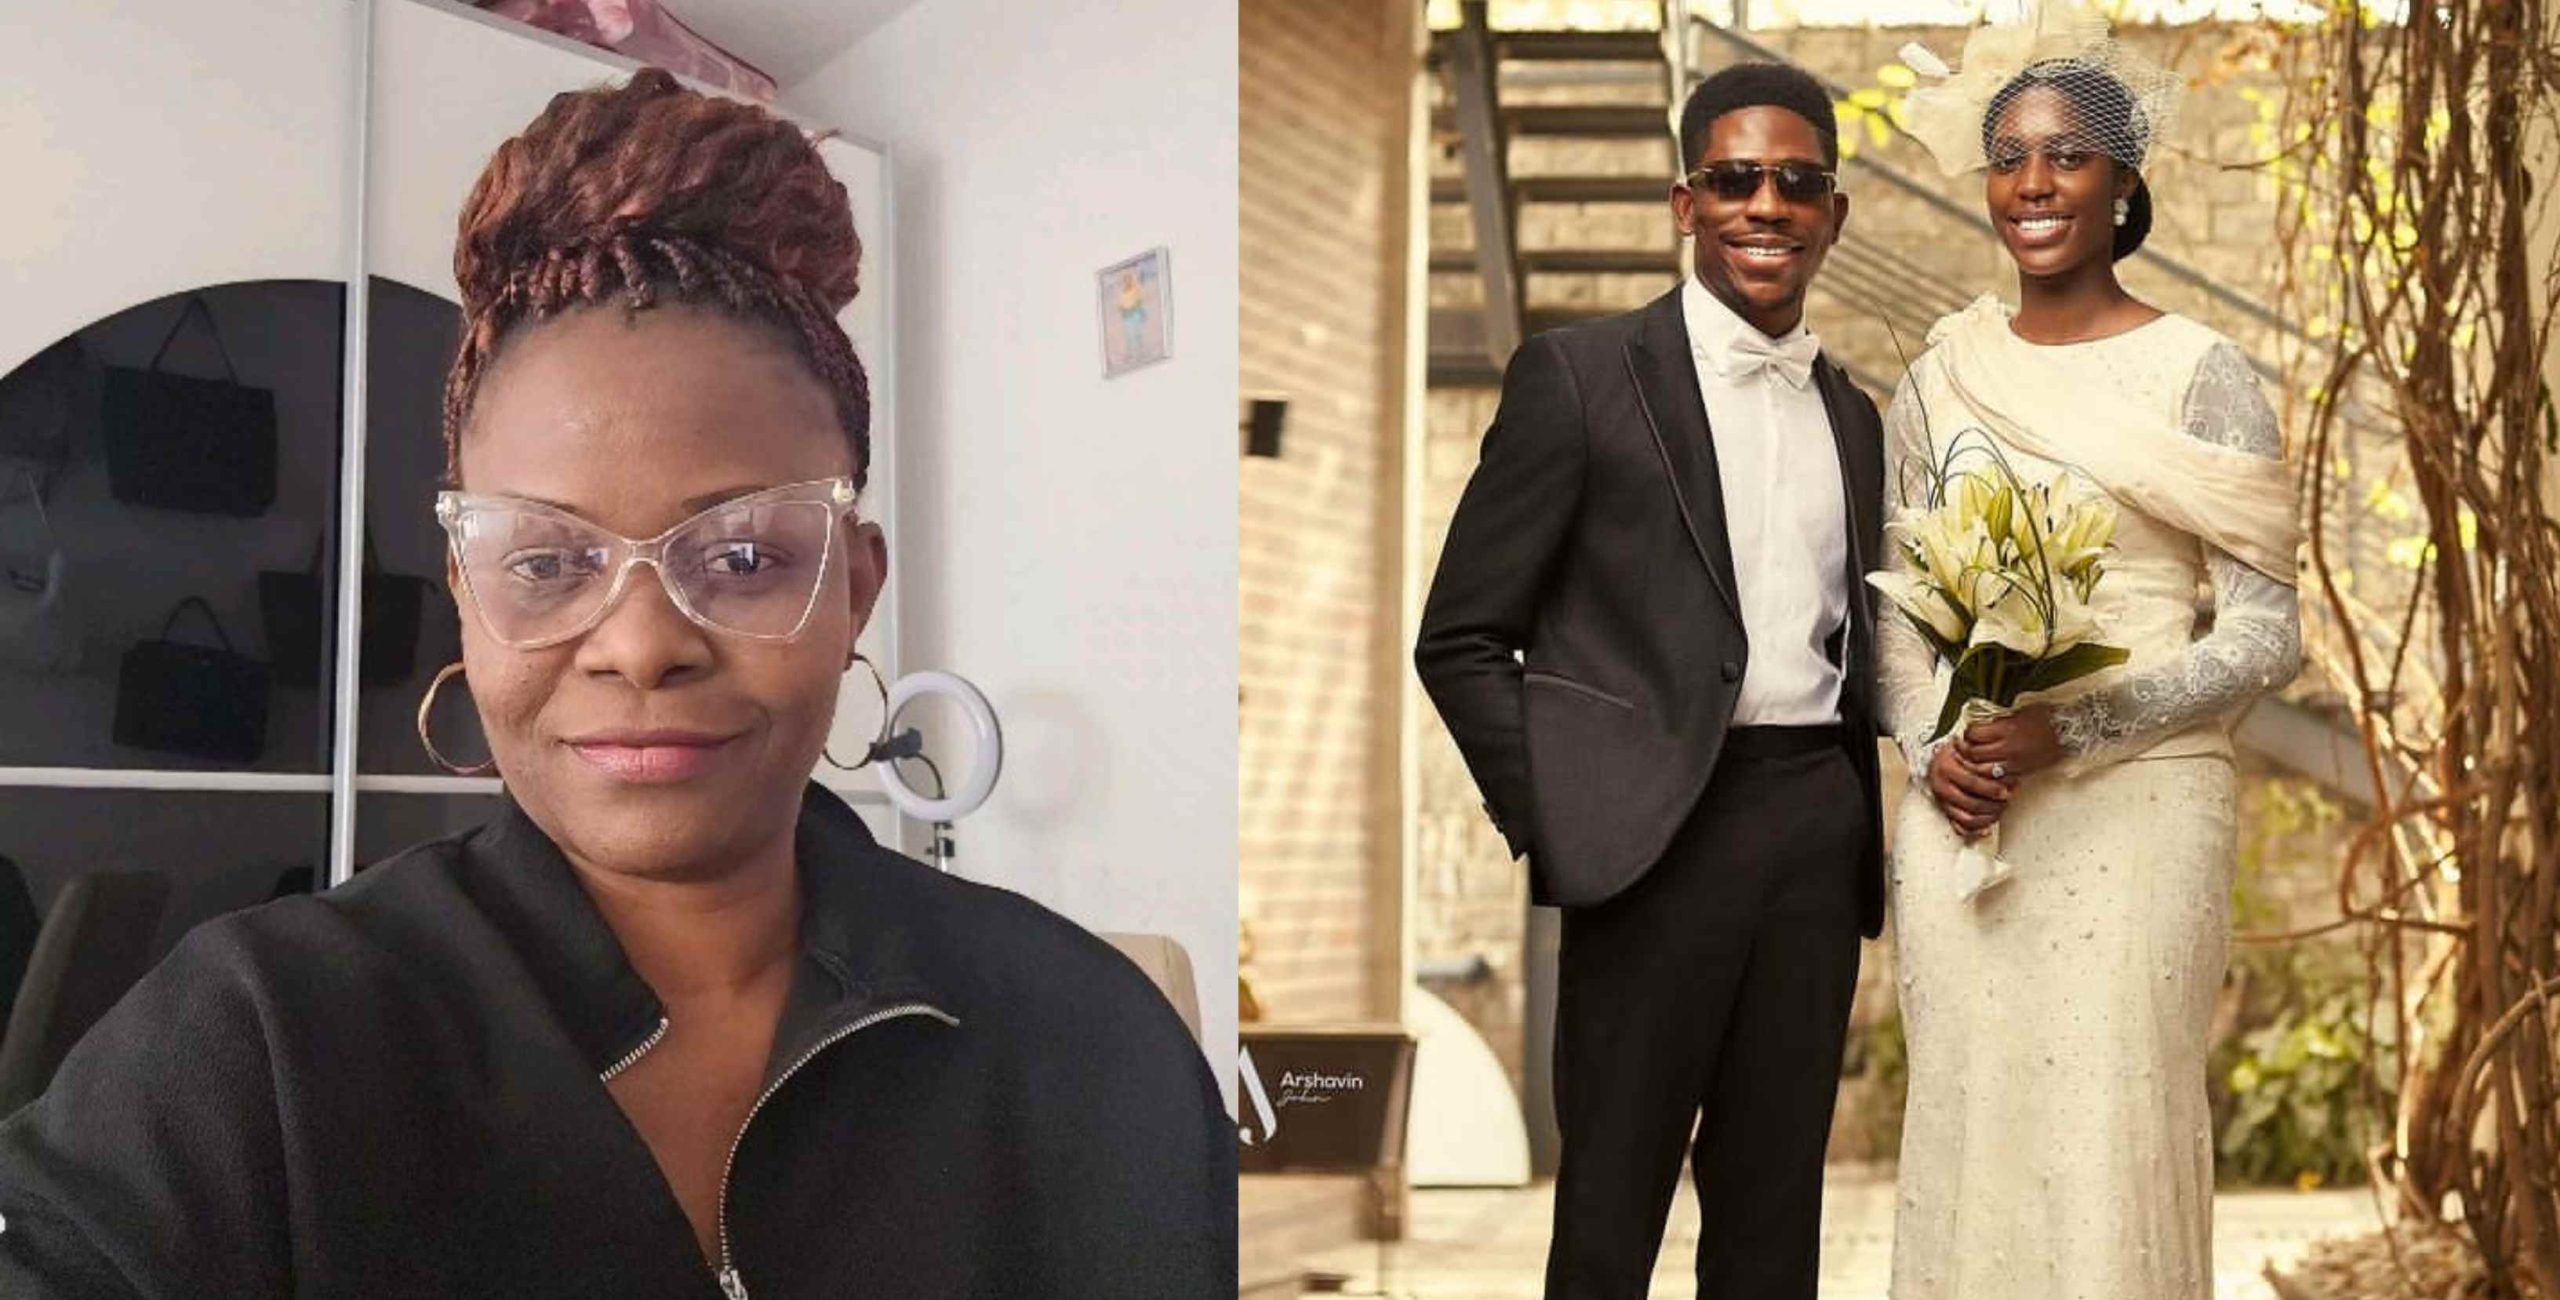 Nigerian Lady drags Moses Bliss for marrying from Ghana